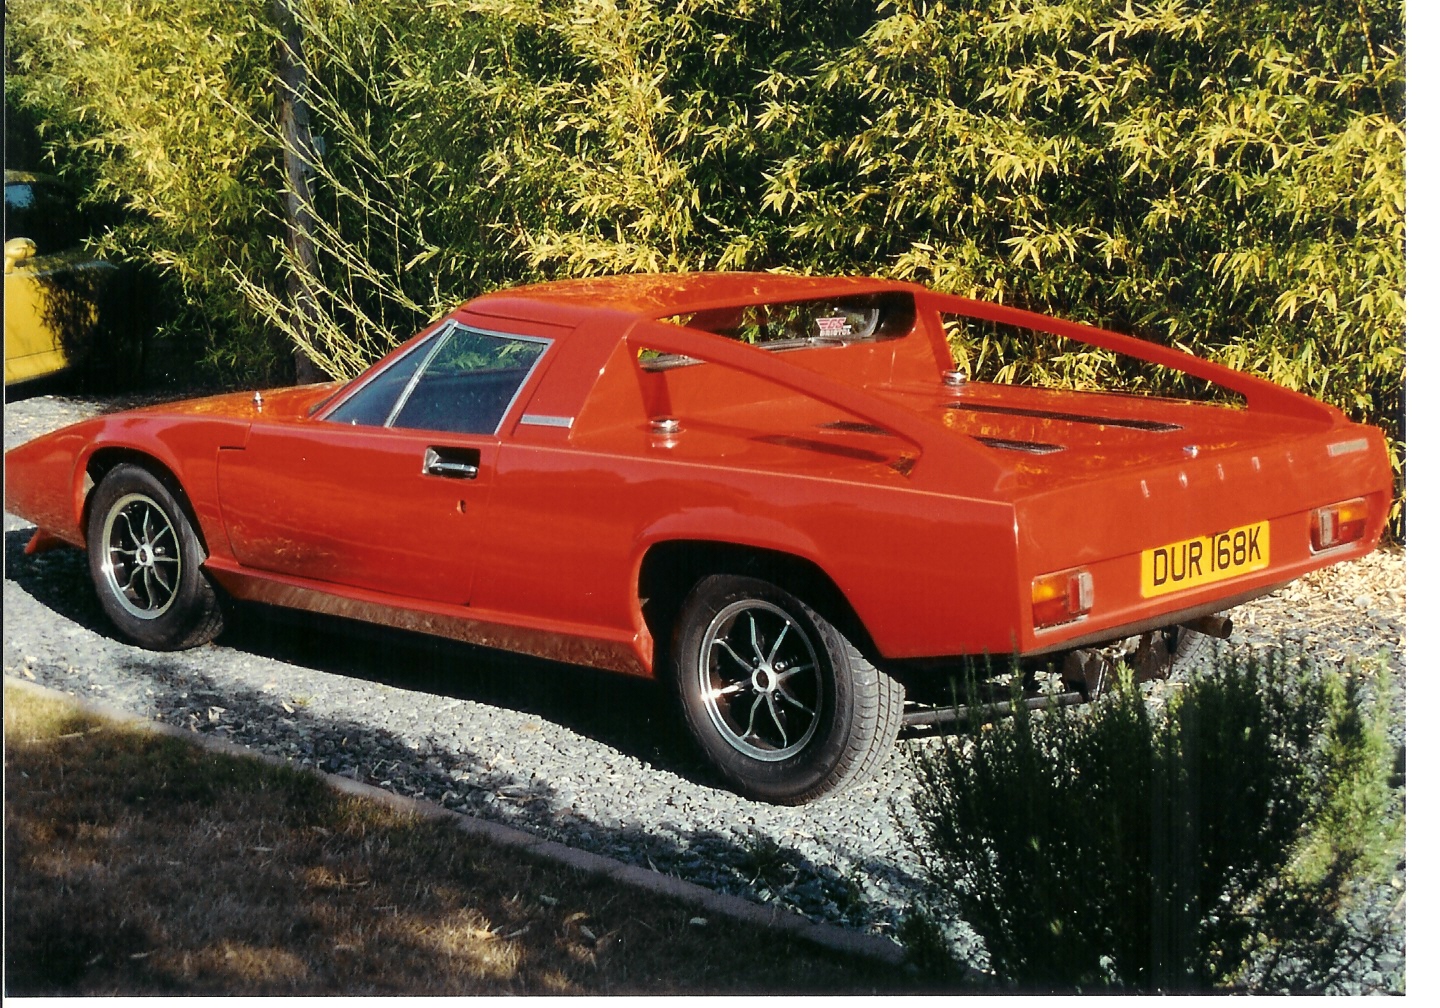 Lotus GS Europa (one of only two in UK)